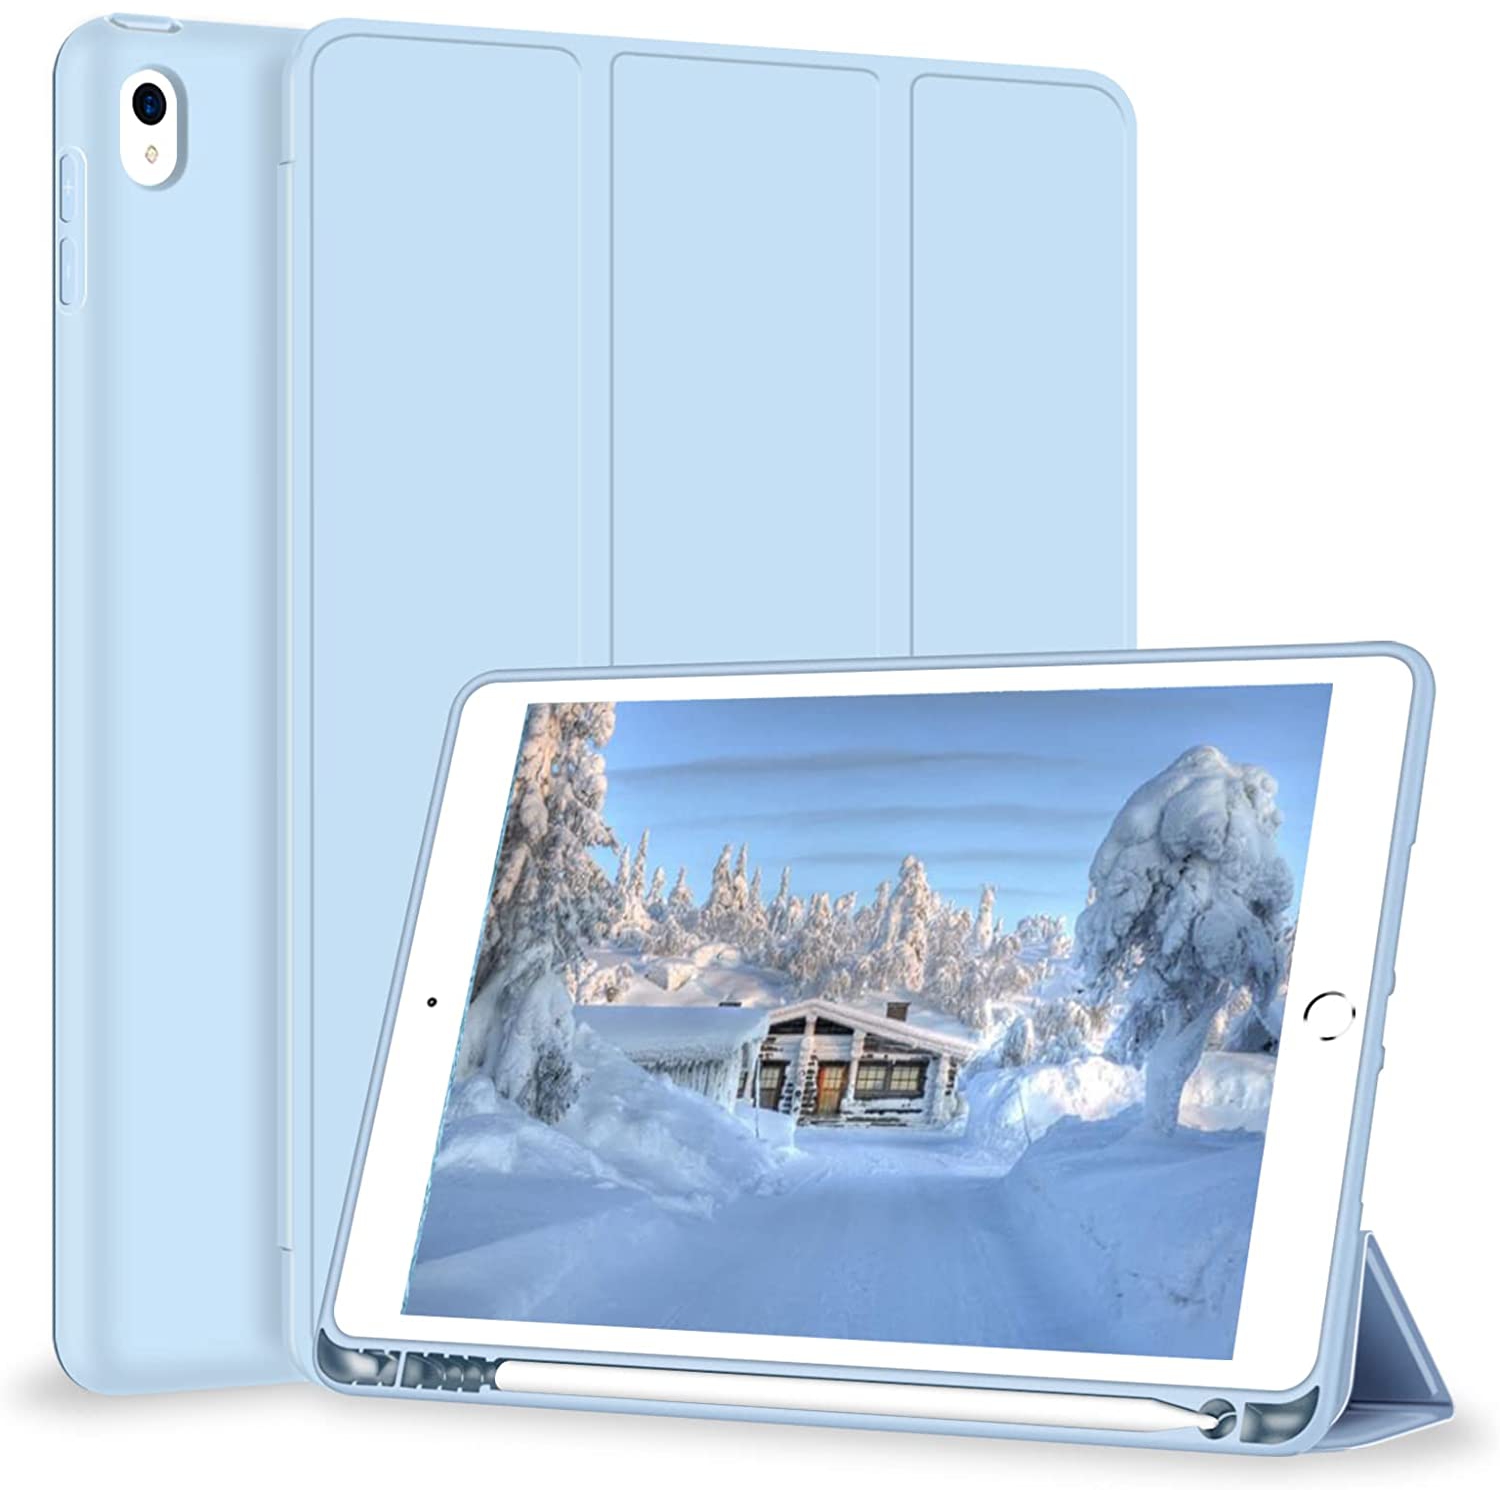 D Case for iPad Air 3 / Pro 10.5 Inch, Lightweight Slim Soft TPU Trifold Stand Smart Cover, Auto Sleep/Wake Case with Pencil Holder for iPad Air 3rd Generation / Pro 10.5, Light Bl